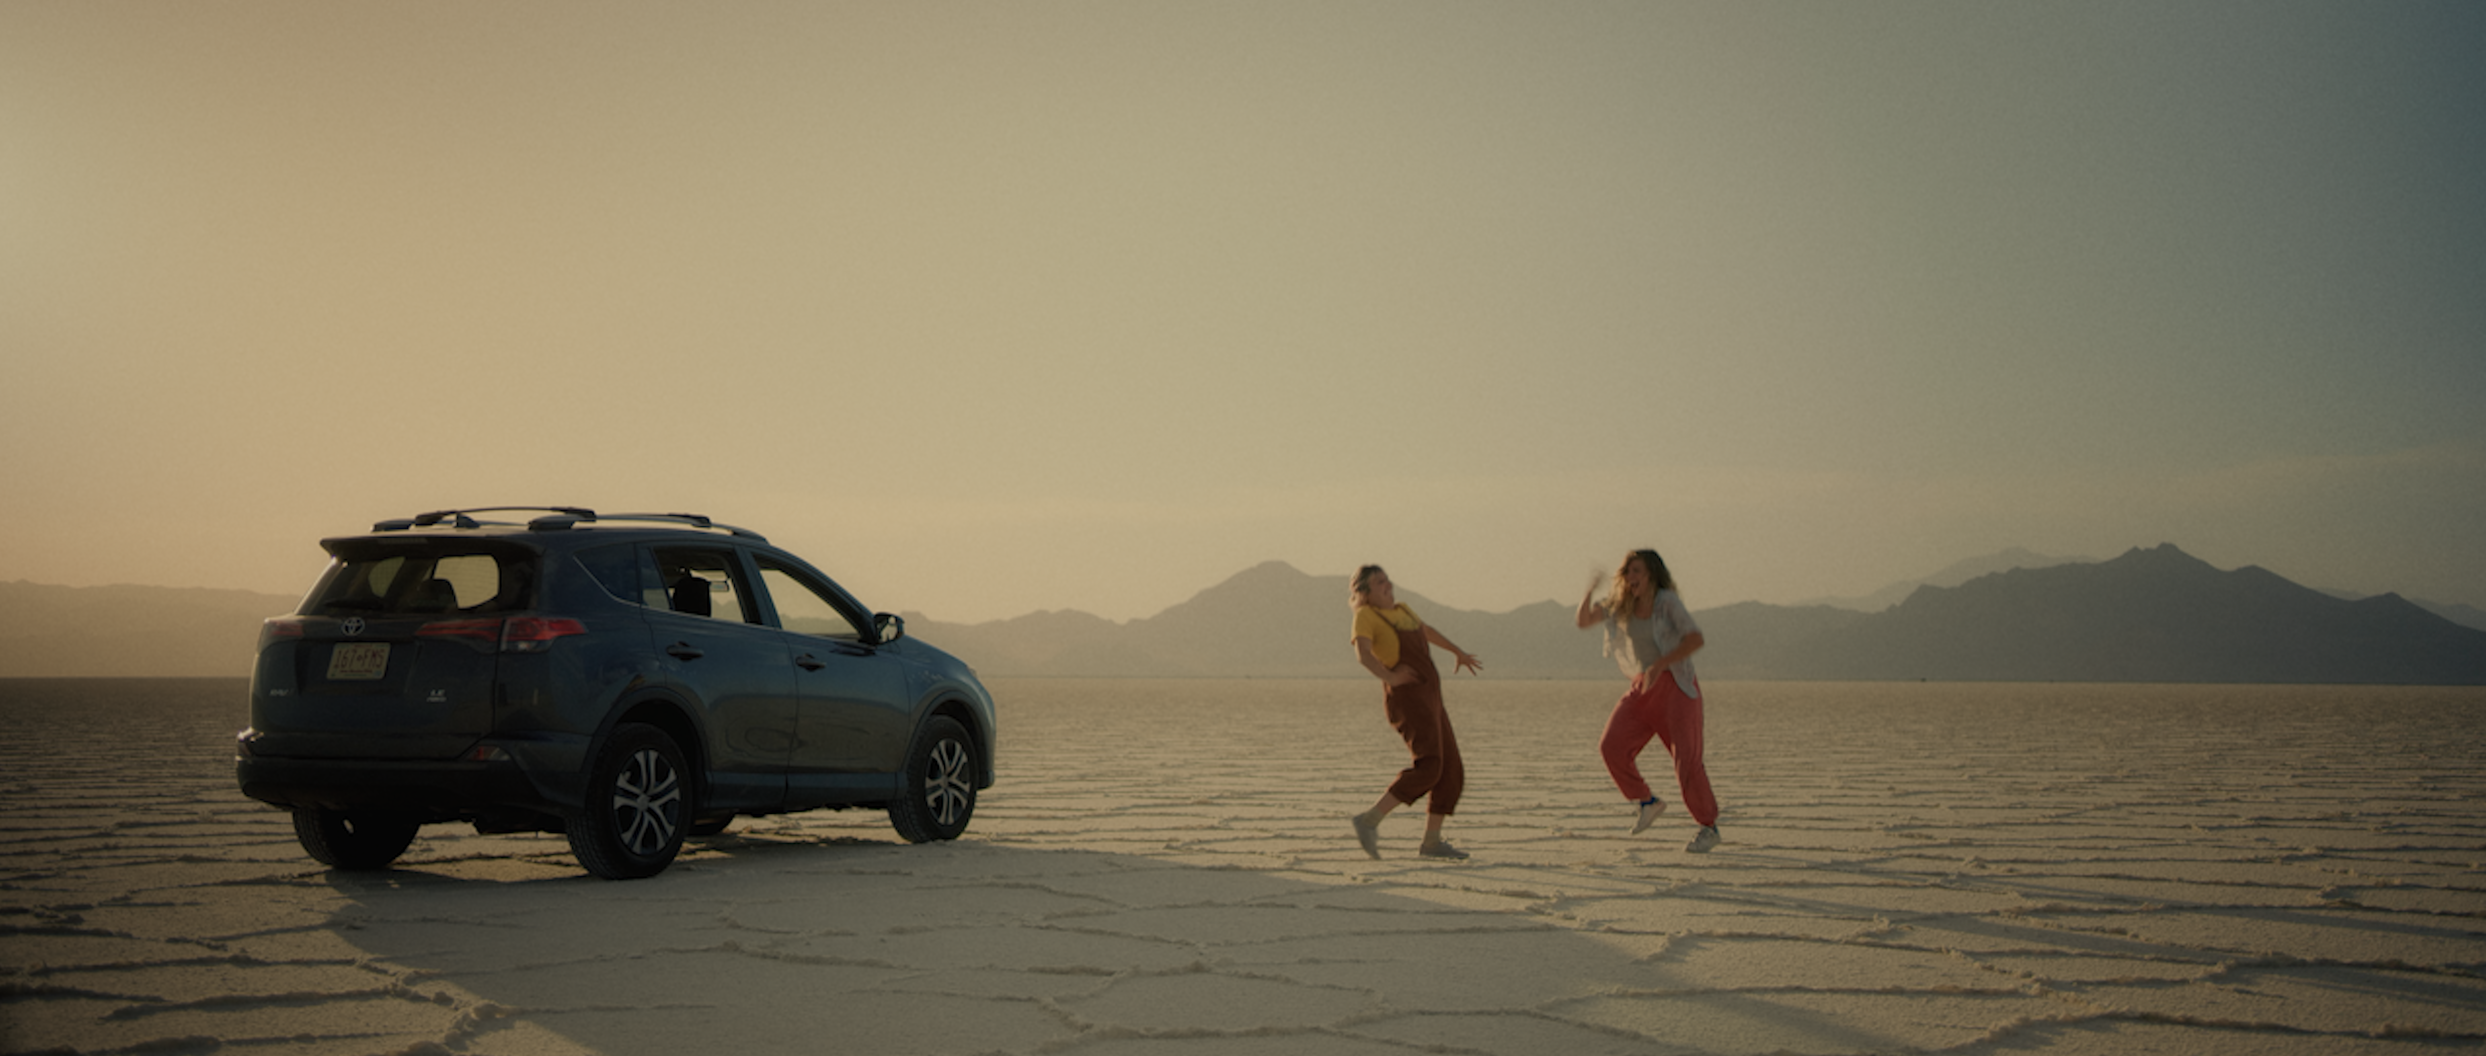 two people dancing next to a car on salt flats